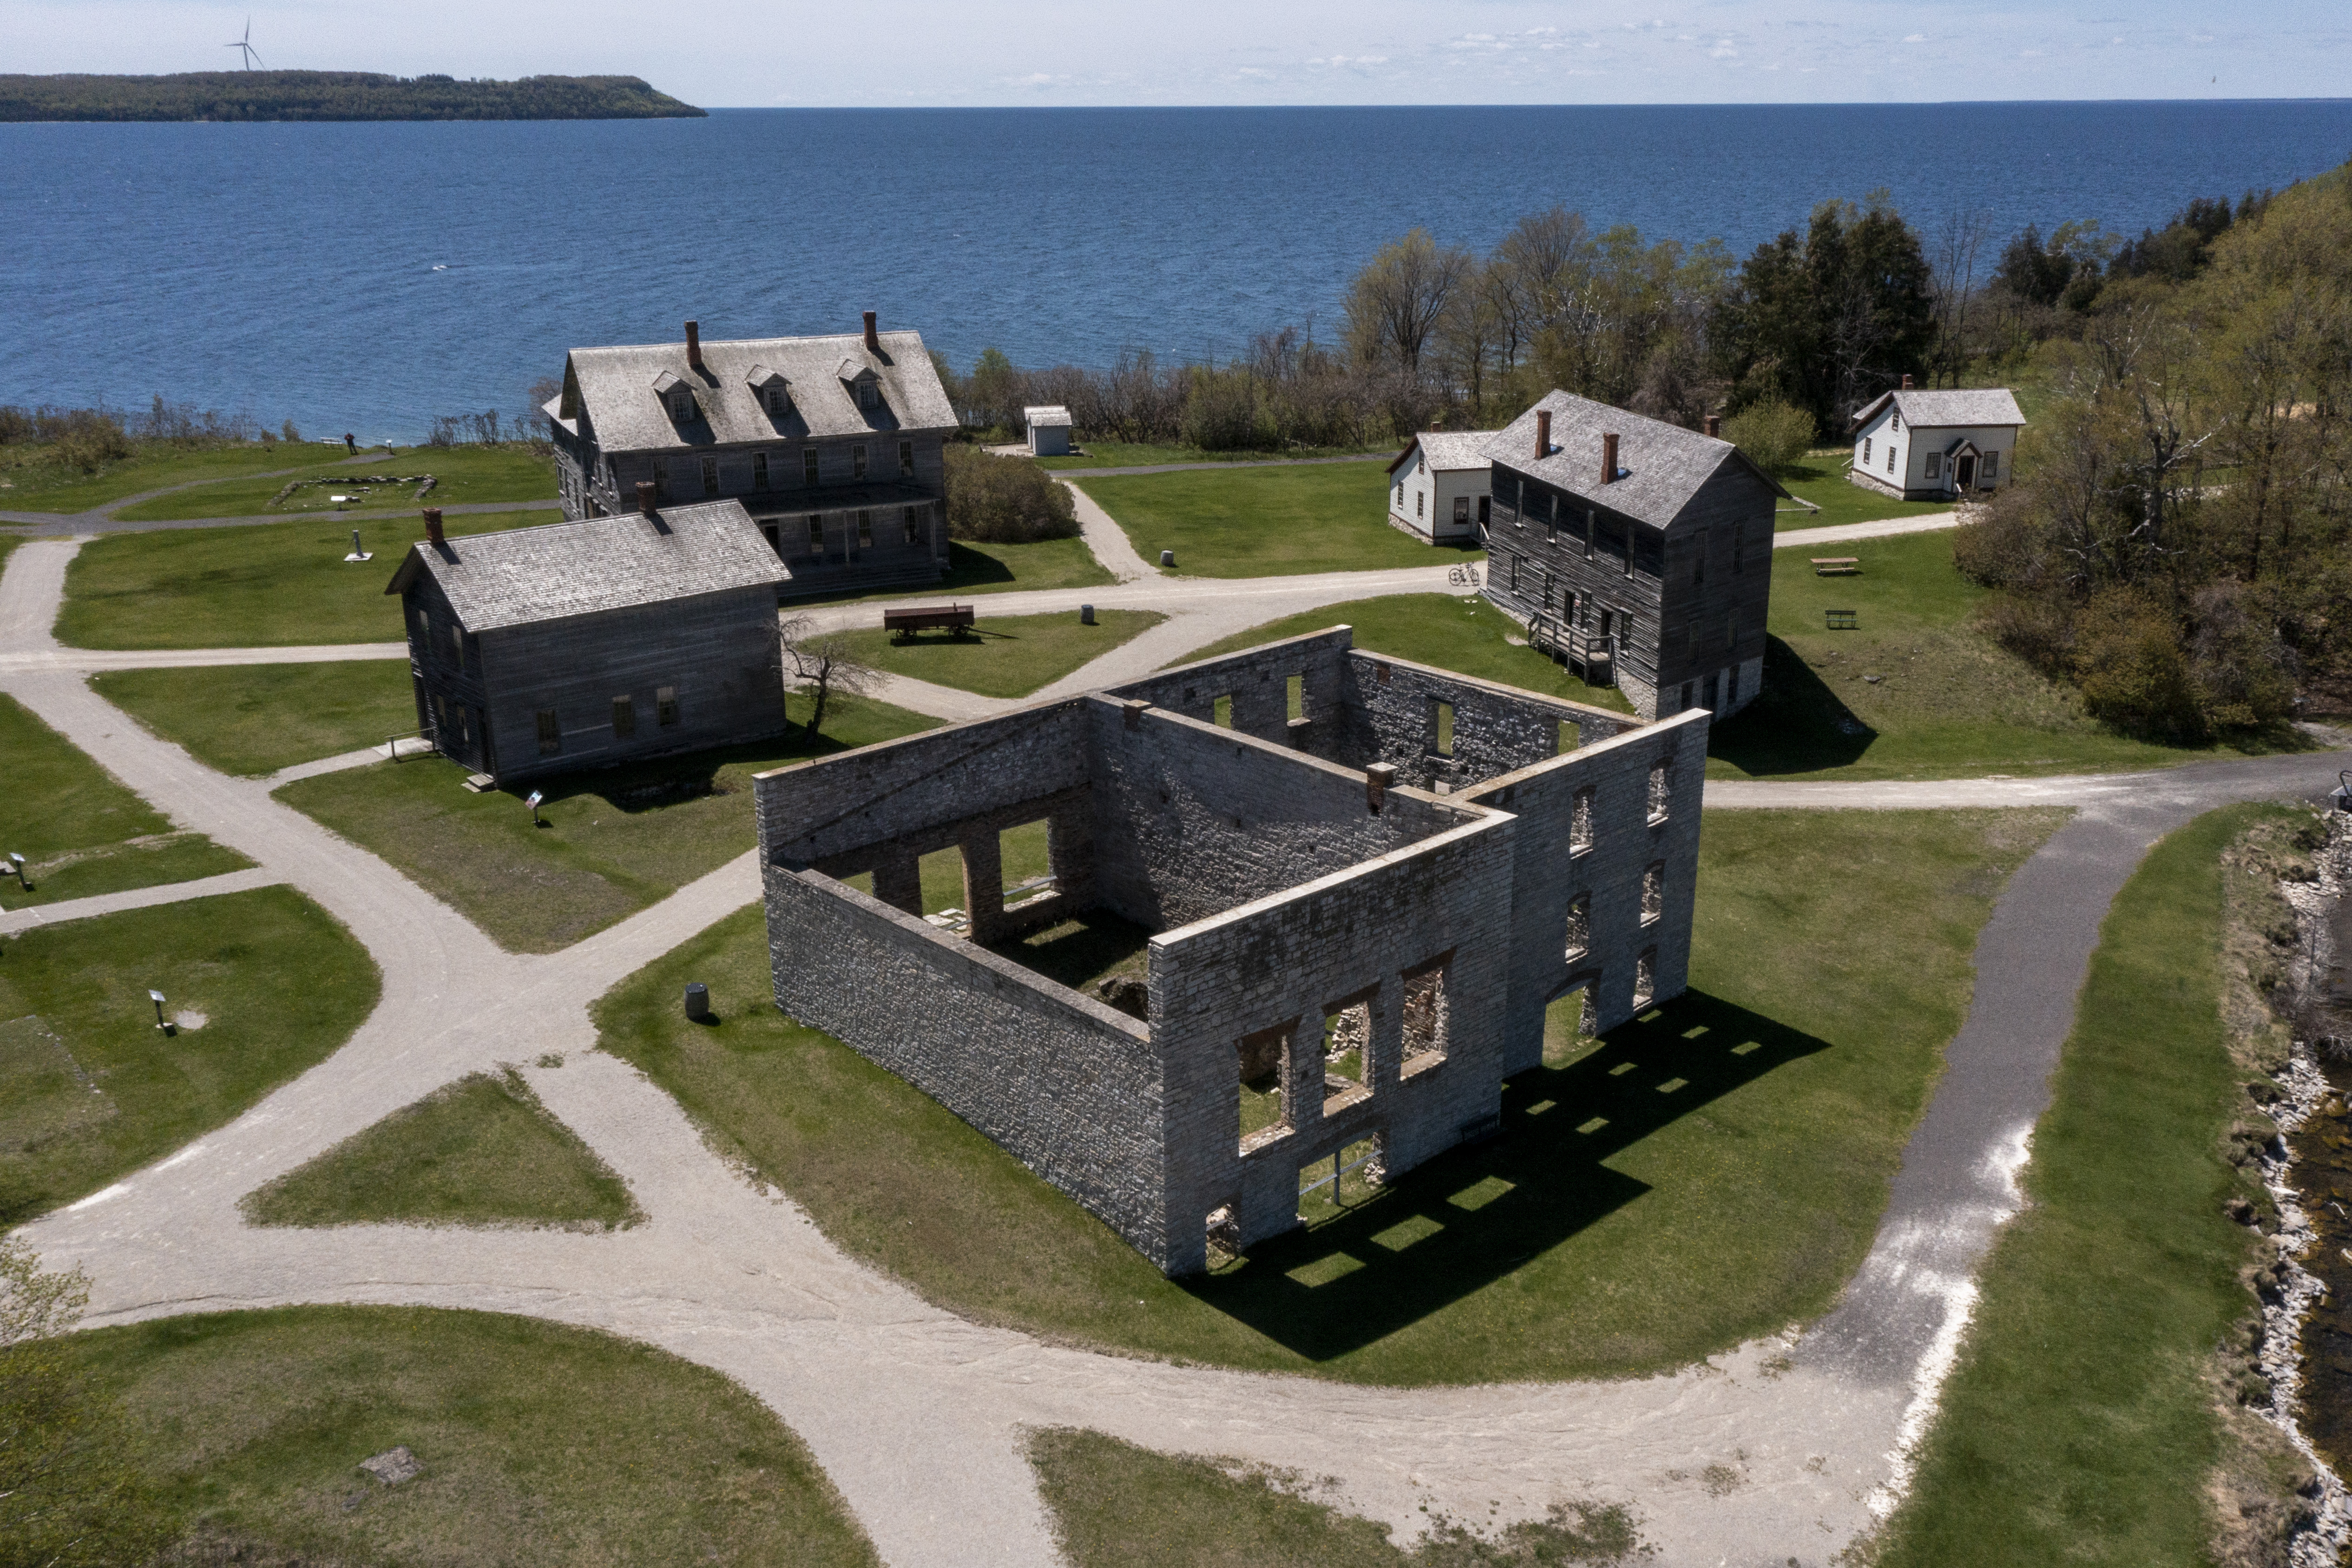 Fayette Historic State Park near Garden on Tuesday, May 17, 2022. The historic townsite manufactured charcoal pig iron between 1867 and 1891. (Drone image by Cory Morse | MLive.com)
